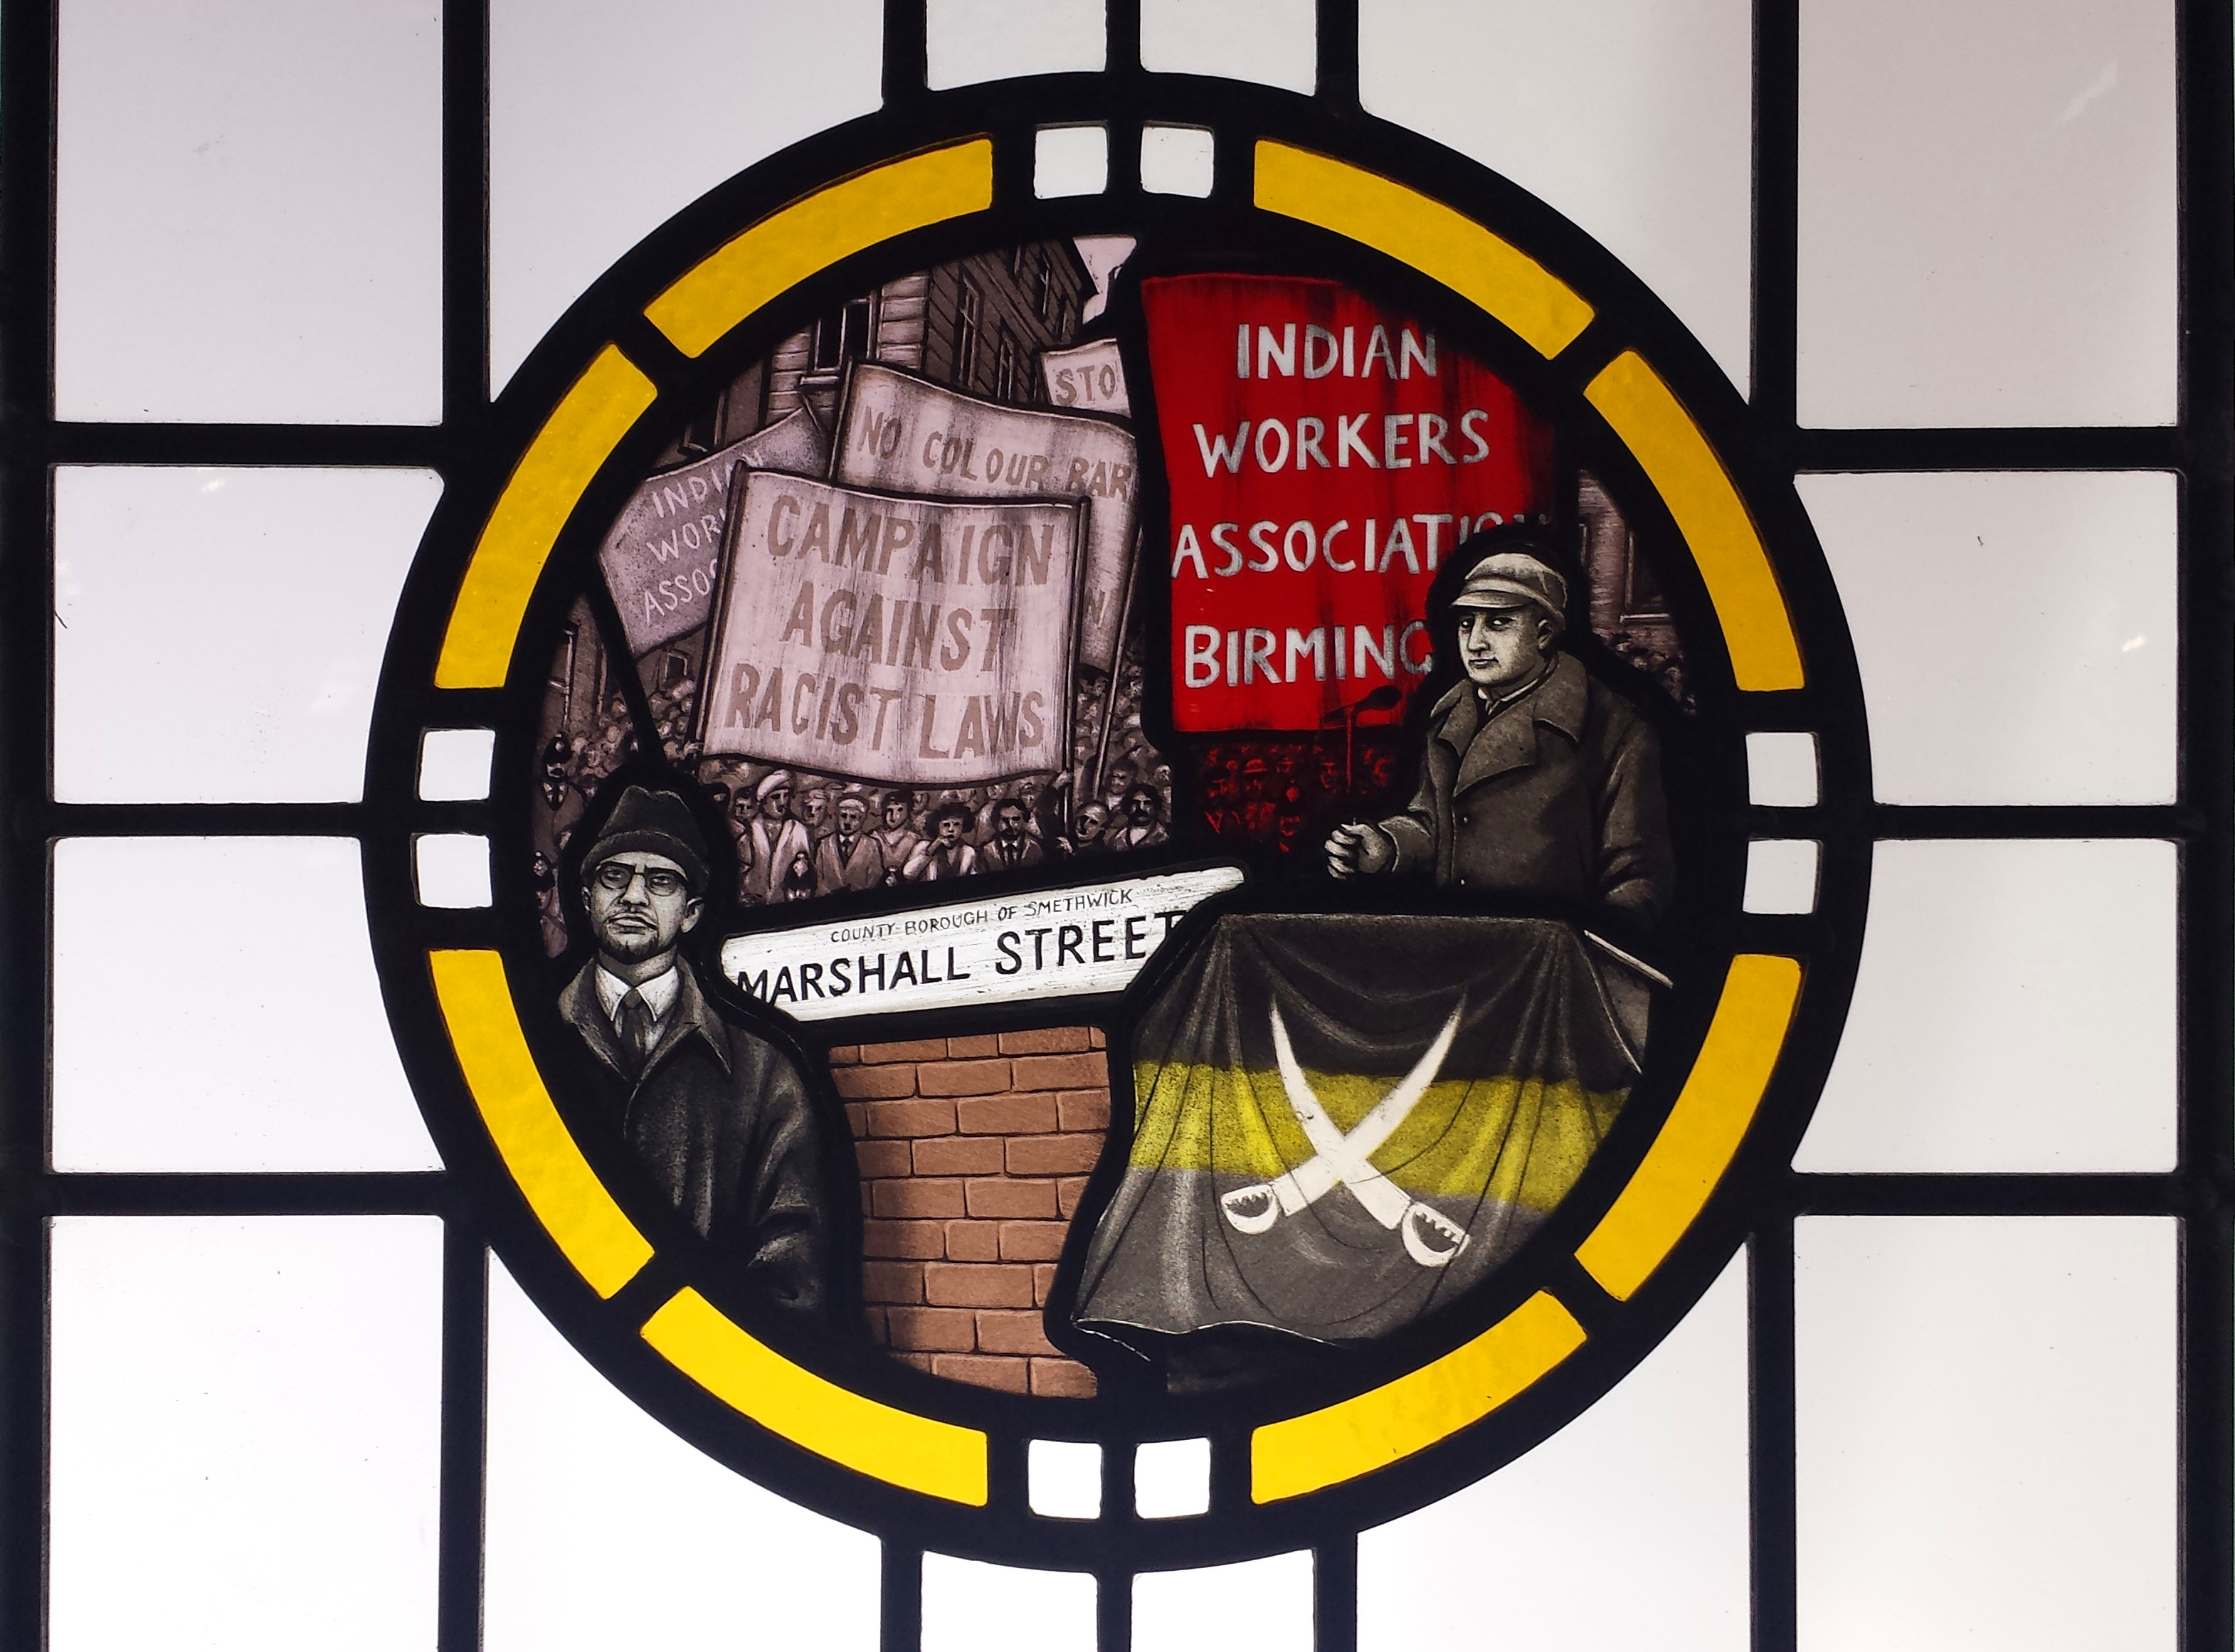 Against Racism stain glass - Desi pubs project